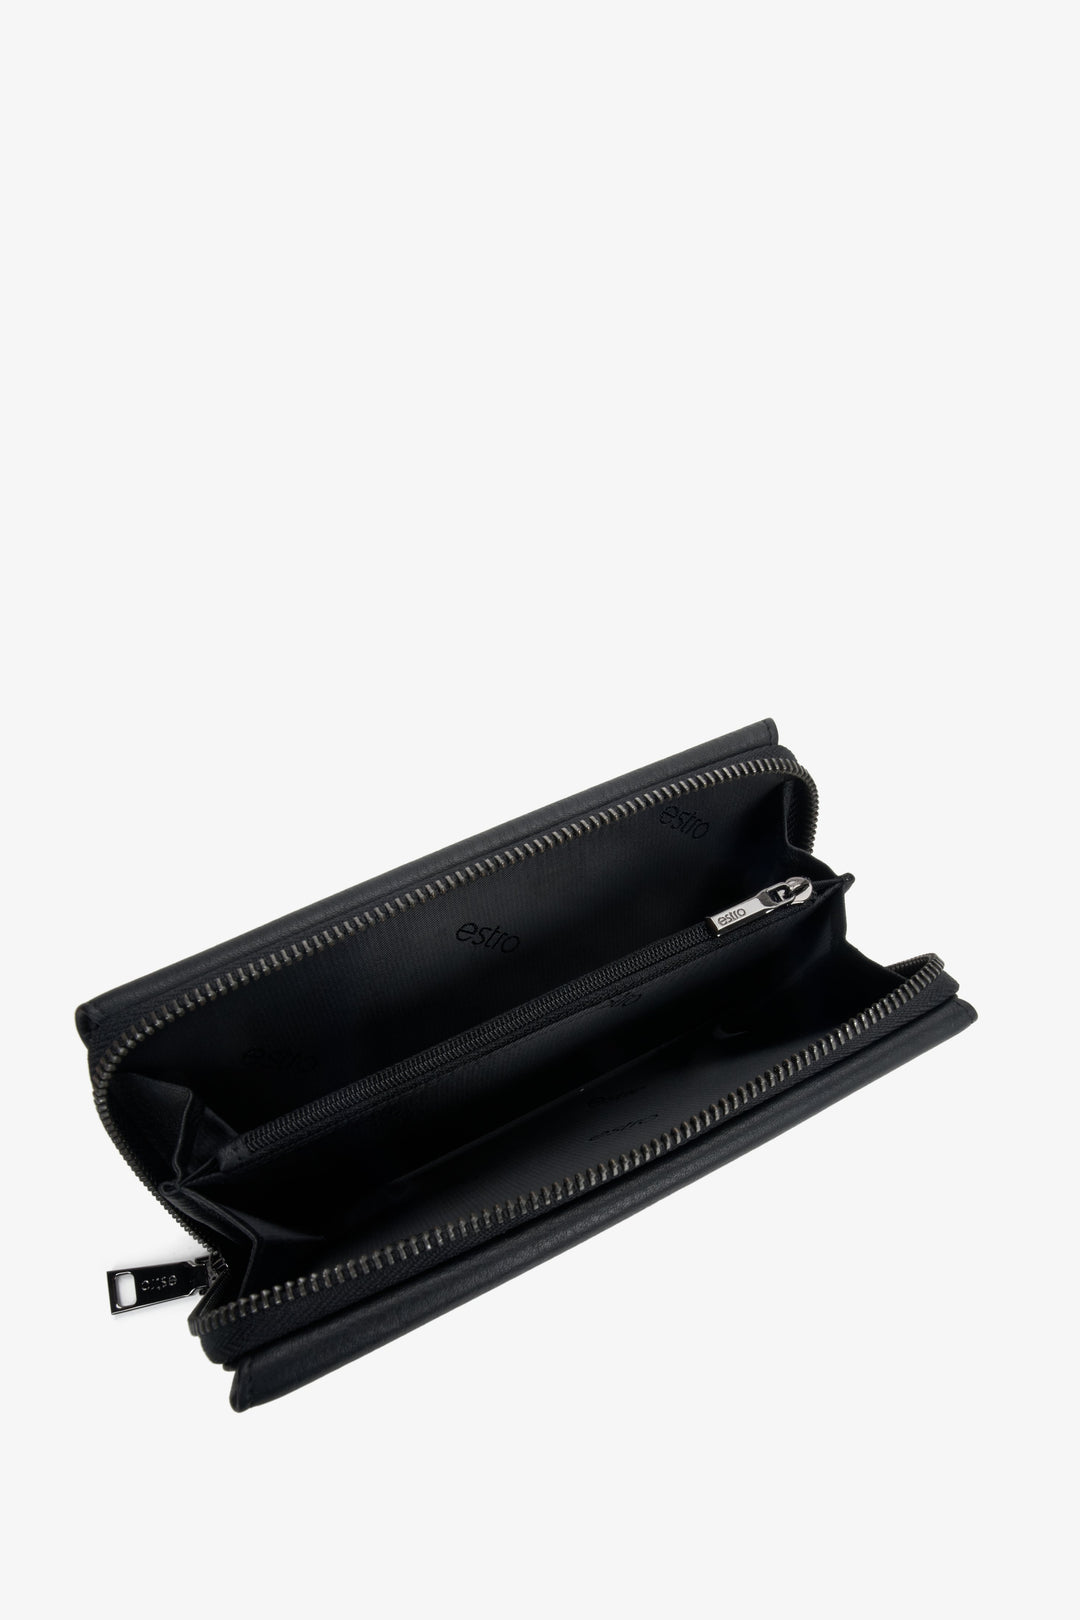 Estro men's black wallet, spacious and made of genuine leather.